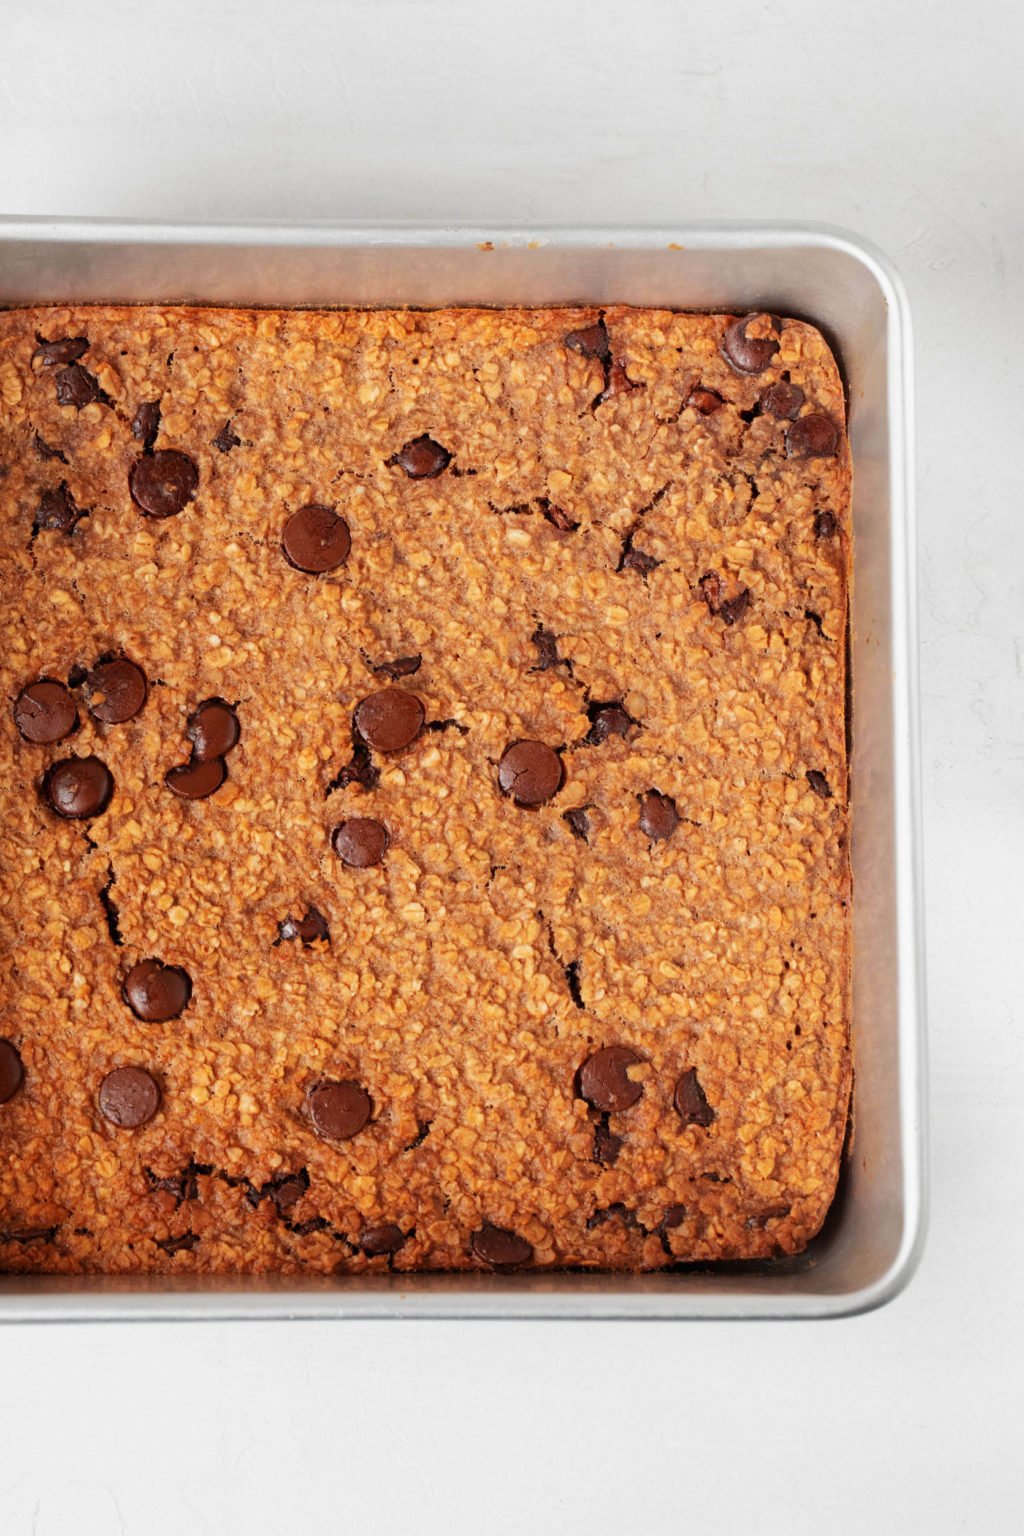 A square, aluminum baking dish is filled with a baked mixture of whole grains.